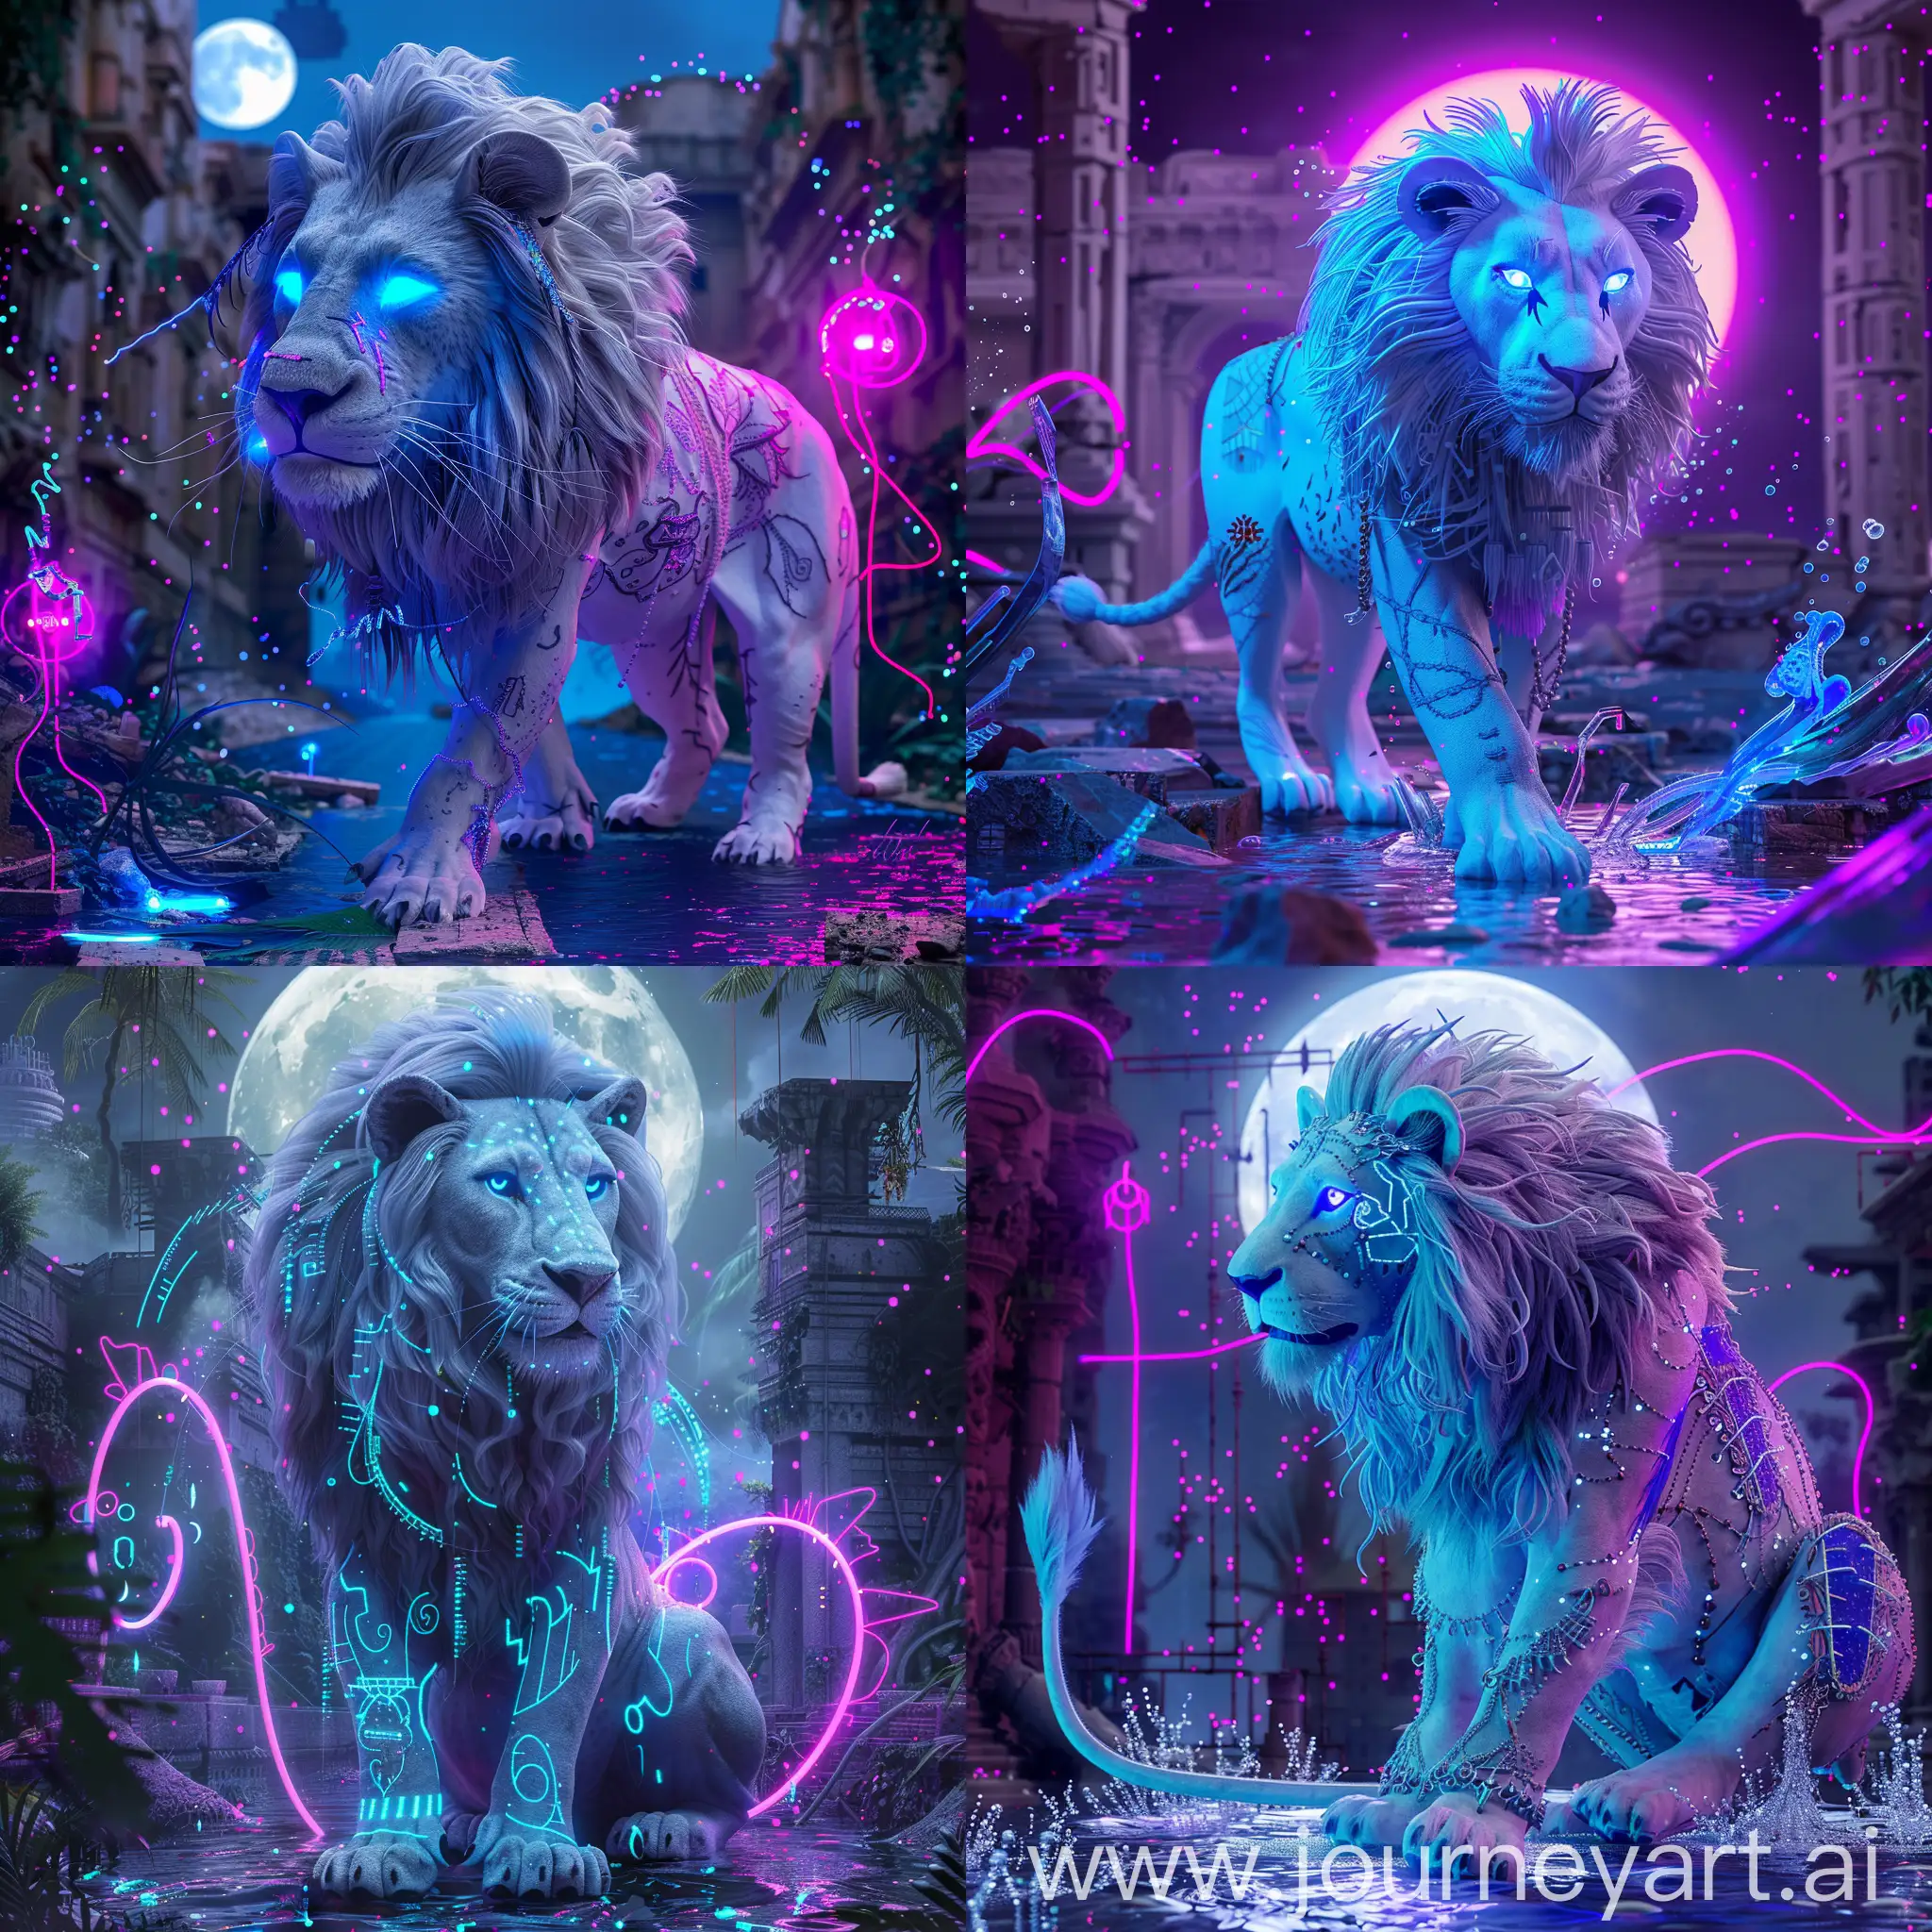 a realistic, Its blue majestic white lion with a long, flowing mane and tail. Its blue eyes and glowing blue markings stand out against the backdrop of a full moon, with the ruins of a city surrounding it. The lion’s whistling adds a unique touch to its already striking presence. luminescent. environment, with a random ethnicity and illuminated by striking purple neon lights. It captures every detail as if taken by a Hasselblad X2D camera, showcasing high-definition textures, neon lighting effects, expressive body language, and a vibrant color palette. The setting is modern yet educational, with a touch of surrealism and cyberpunk elements. Intricate details, conceptual embroideries, and the luminosity of water are all rendered in a photorealistic style. The artwork is a masterpiece of intricate details, dramatic natural lighting, and high-quality CGI VFX, presented as a fine art portrait with dynamic, hyperdetailed purple lighting. It’s surrounded by vibrant neon sprinkles in a cinematic scene that merges fantasy with the jungle, featuring ultra-detailed closeups and fairy lighting. The piece embodies Futurism, where antique aesthetics from different cultures meet futuristic designs, all in ancient indigo and future silver. Enjoy this full-body shot portrait with a 3:2 aspect ratio and a raw style --v 6.0